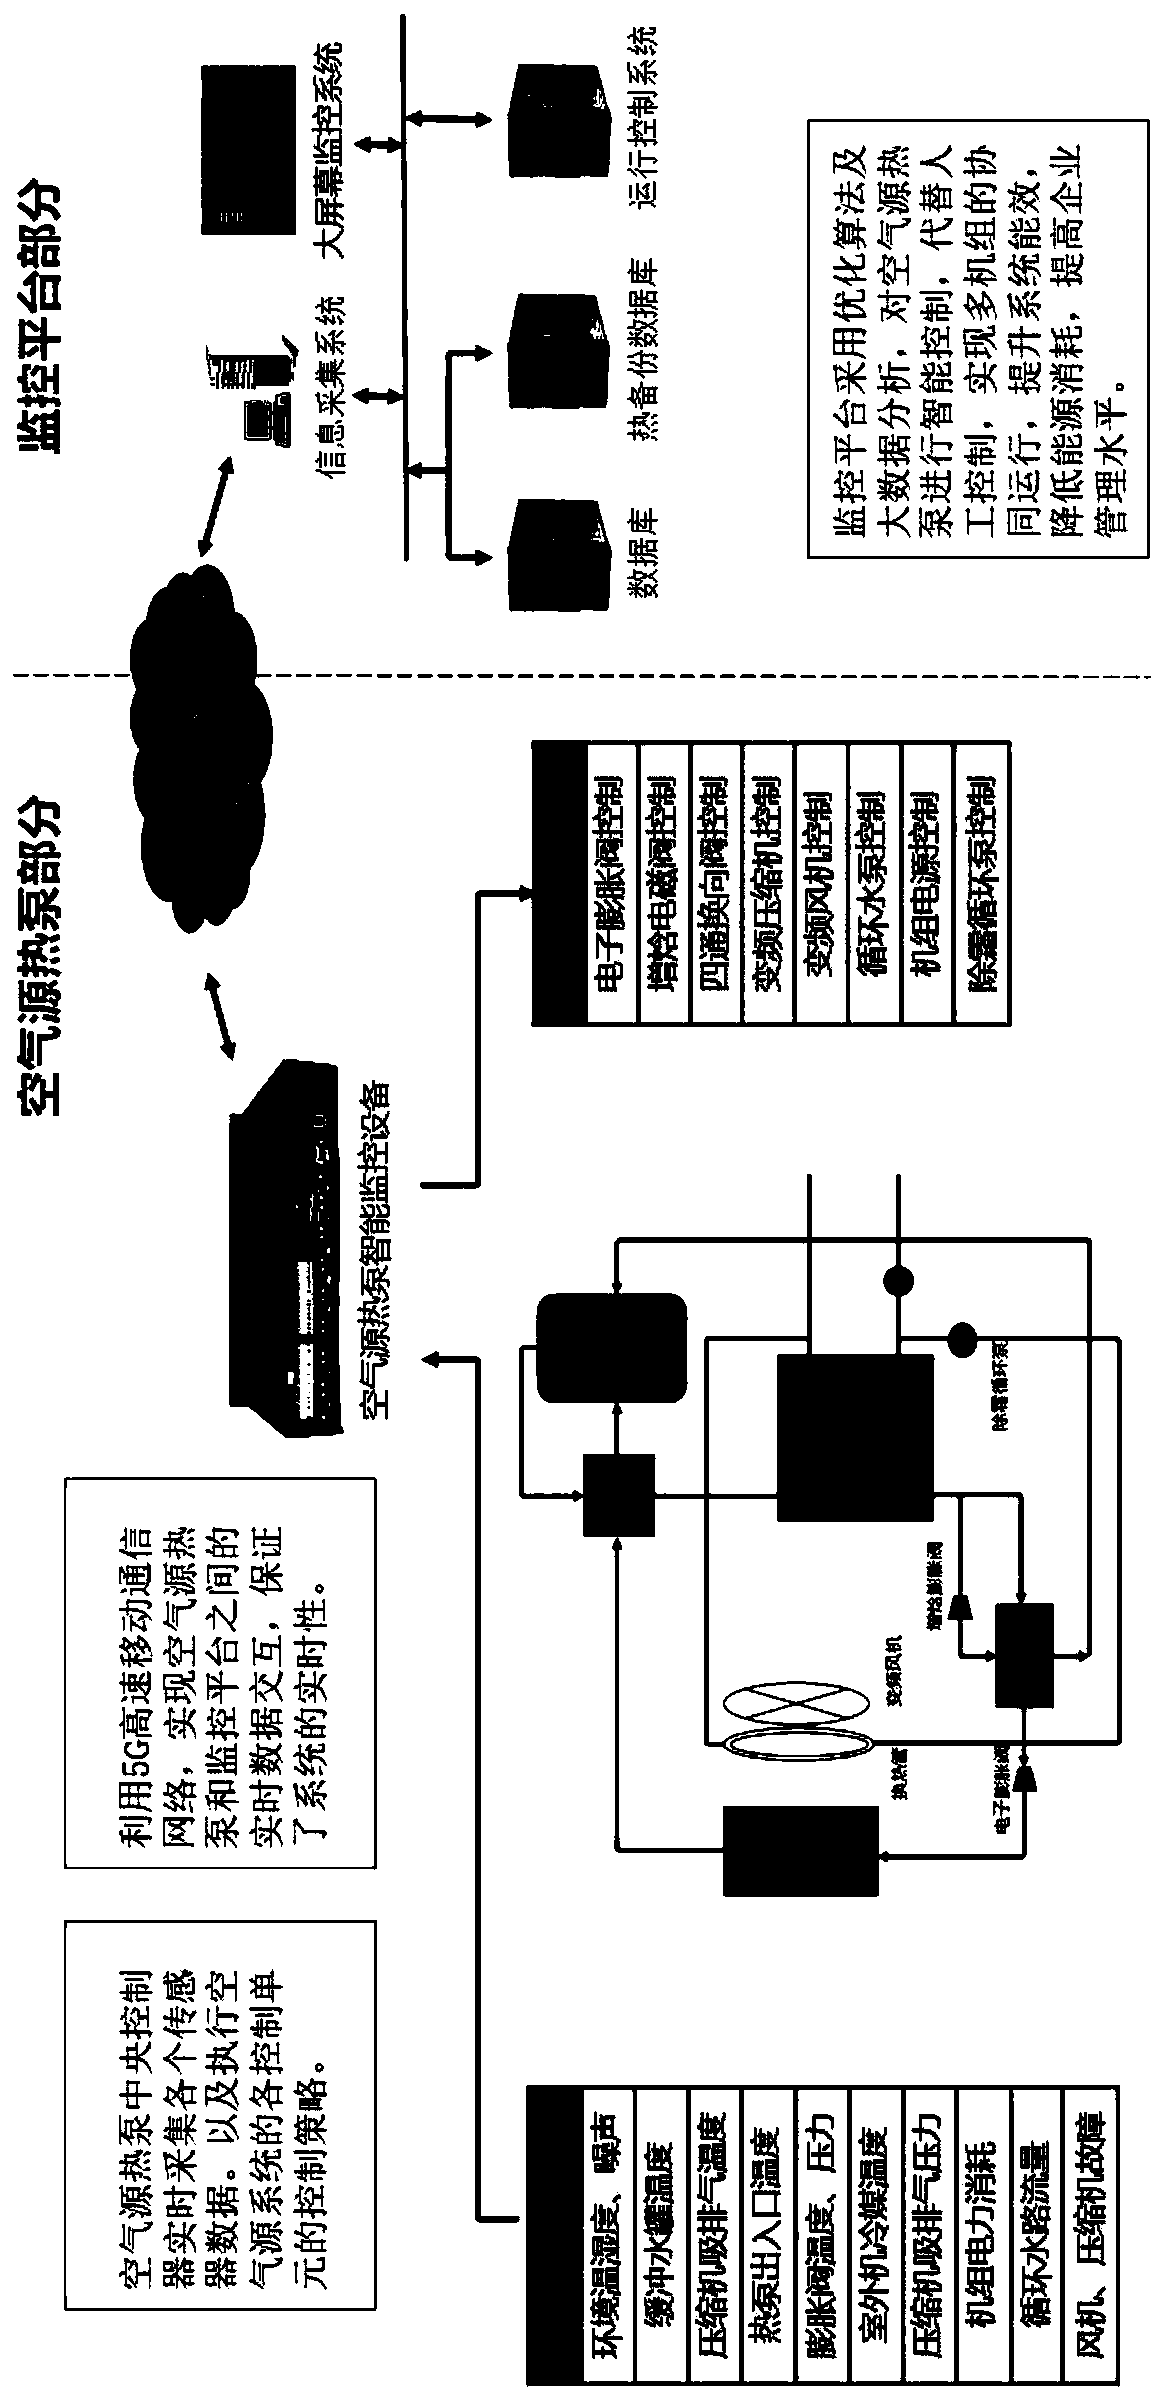 Intelligent air source heat pump control system and method based on big data technology